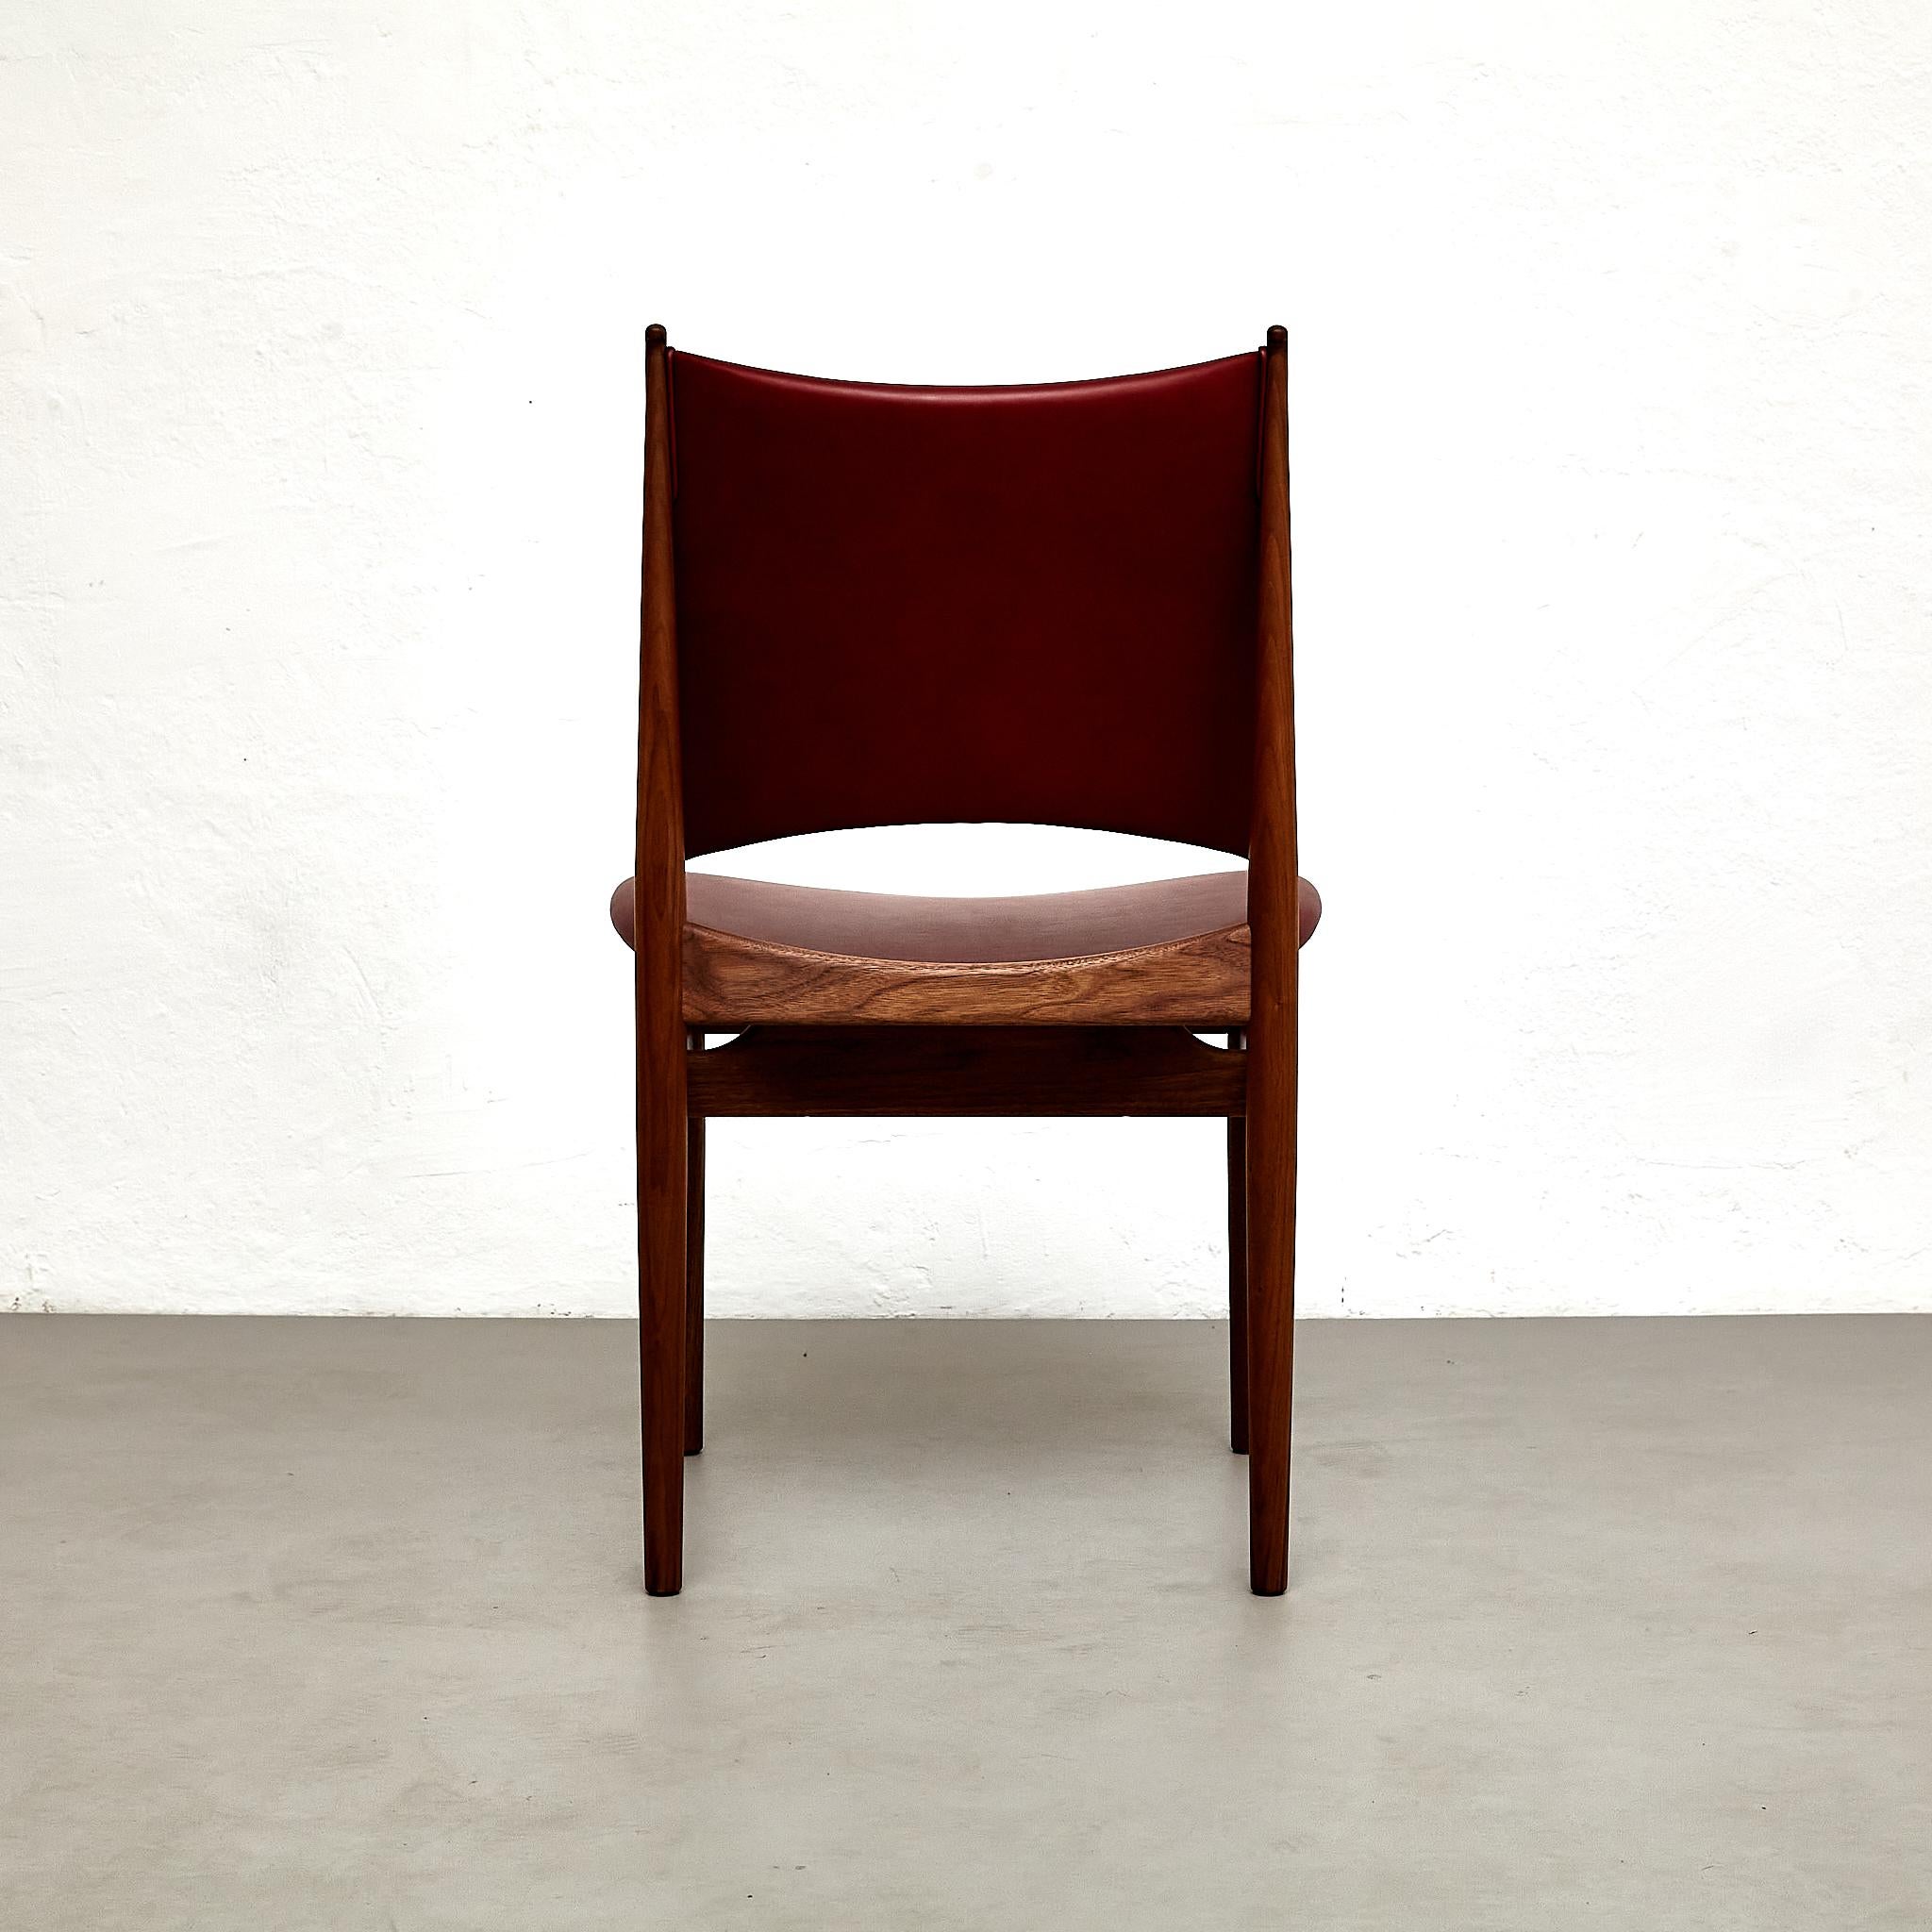 Finn Juhl Egyptian Chair in Walnut Wood and Dark Red Leather For Sale 2